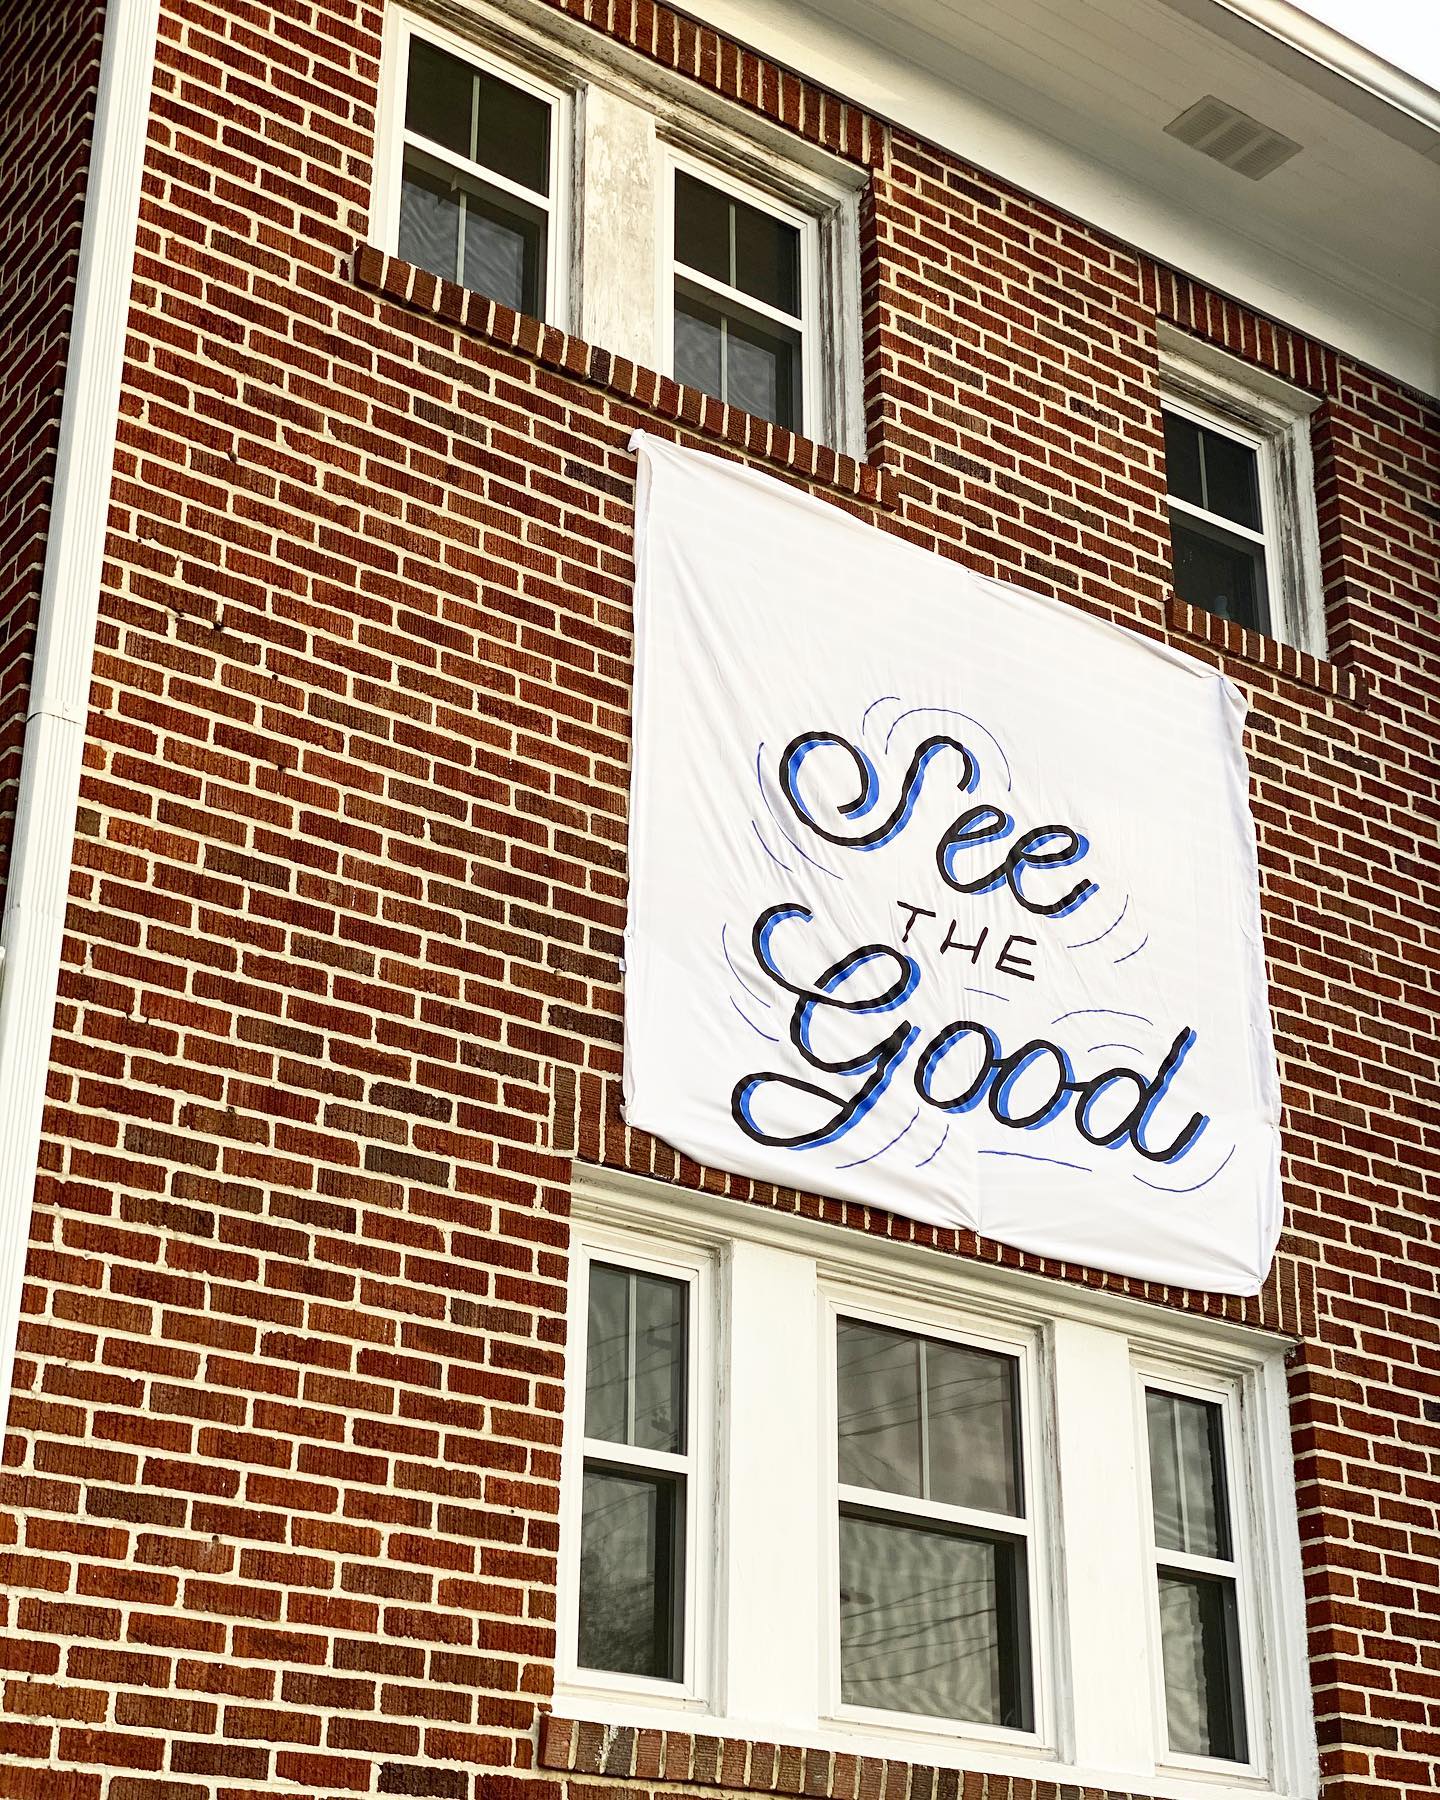 Close up of the sheet that says "See the Good," hanging on The Barbour Spangle Design building.